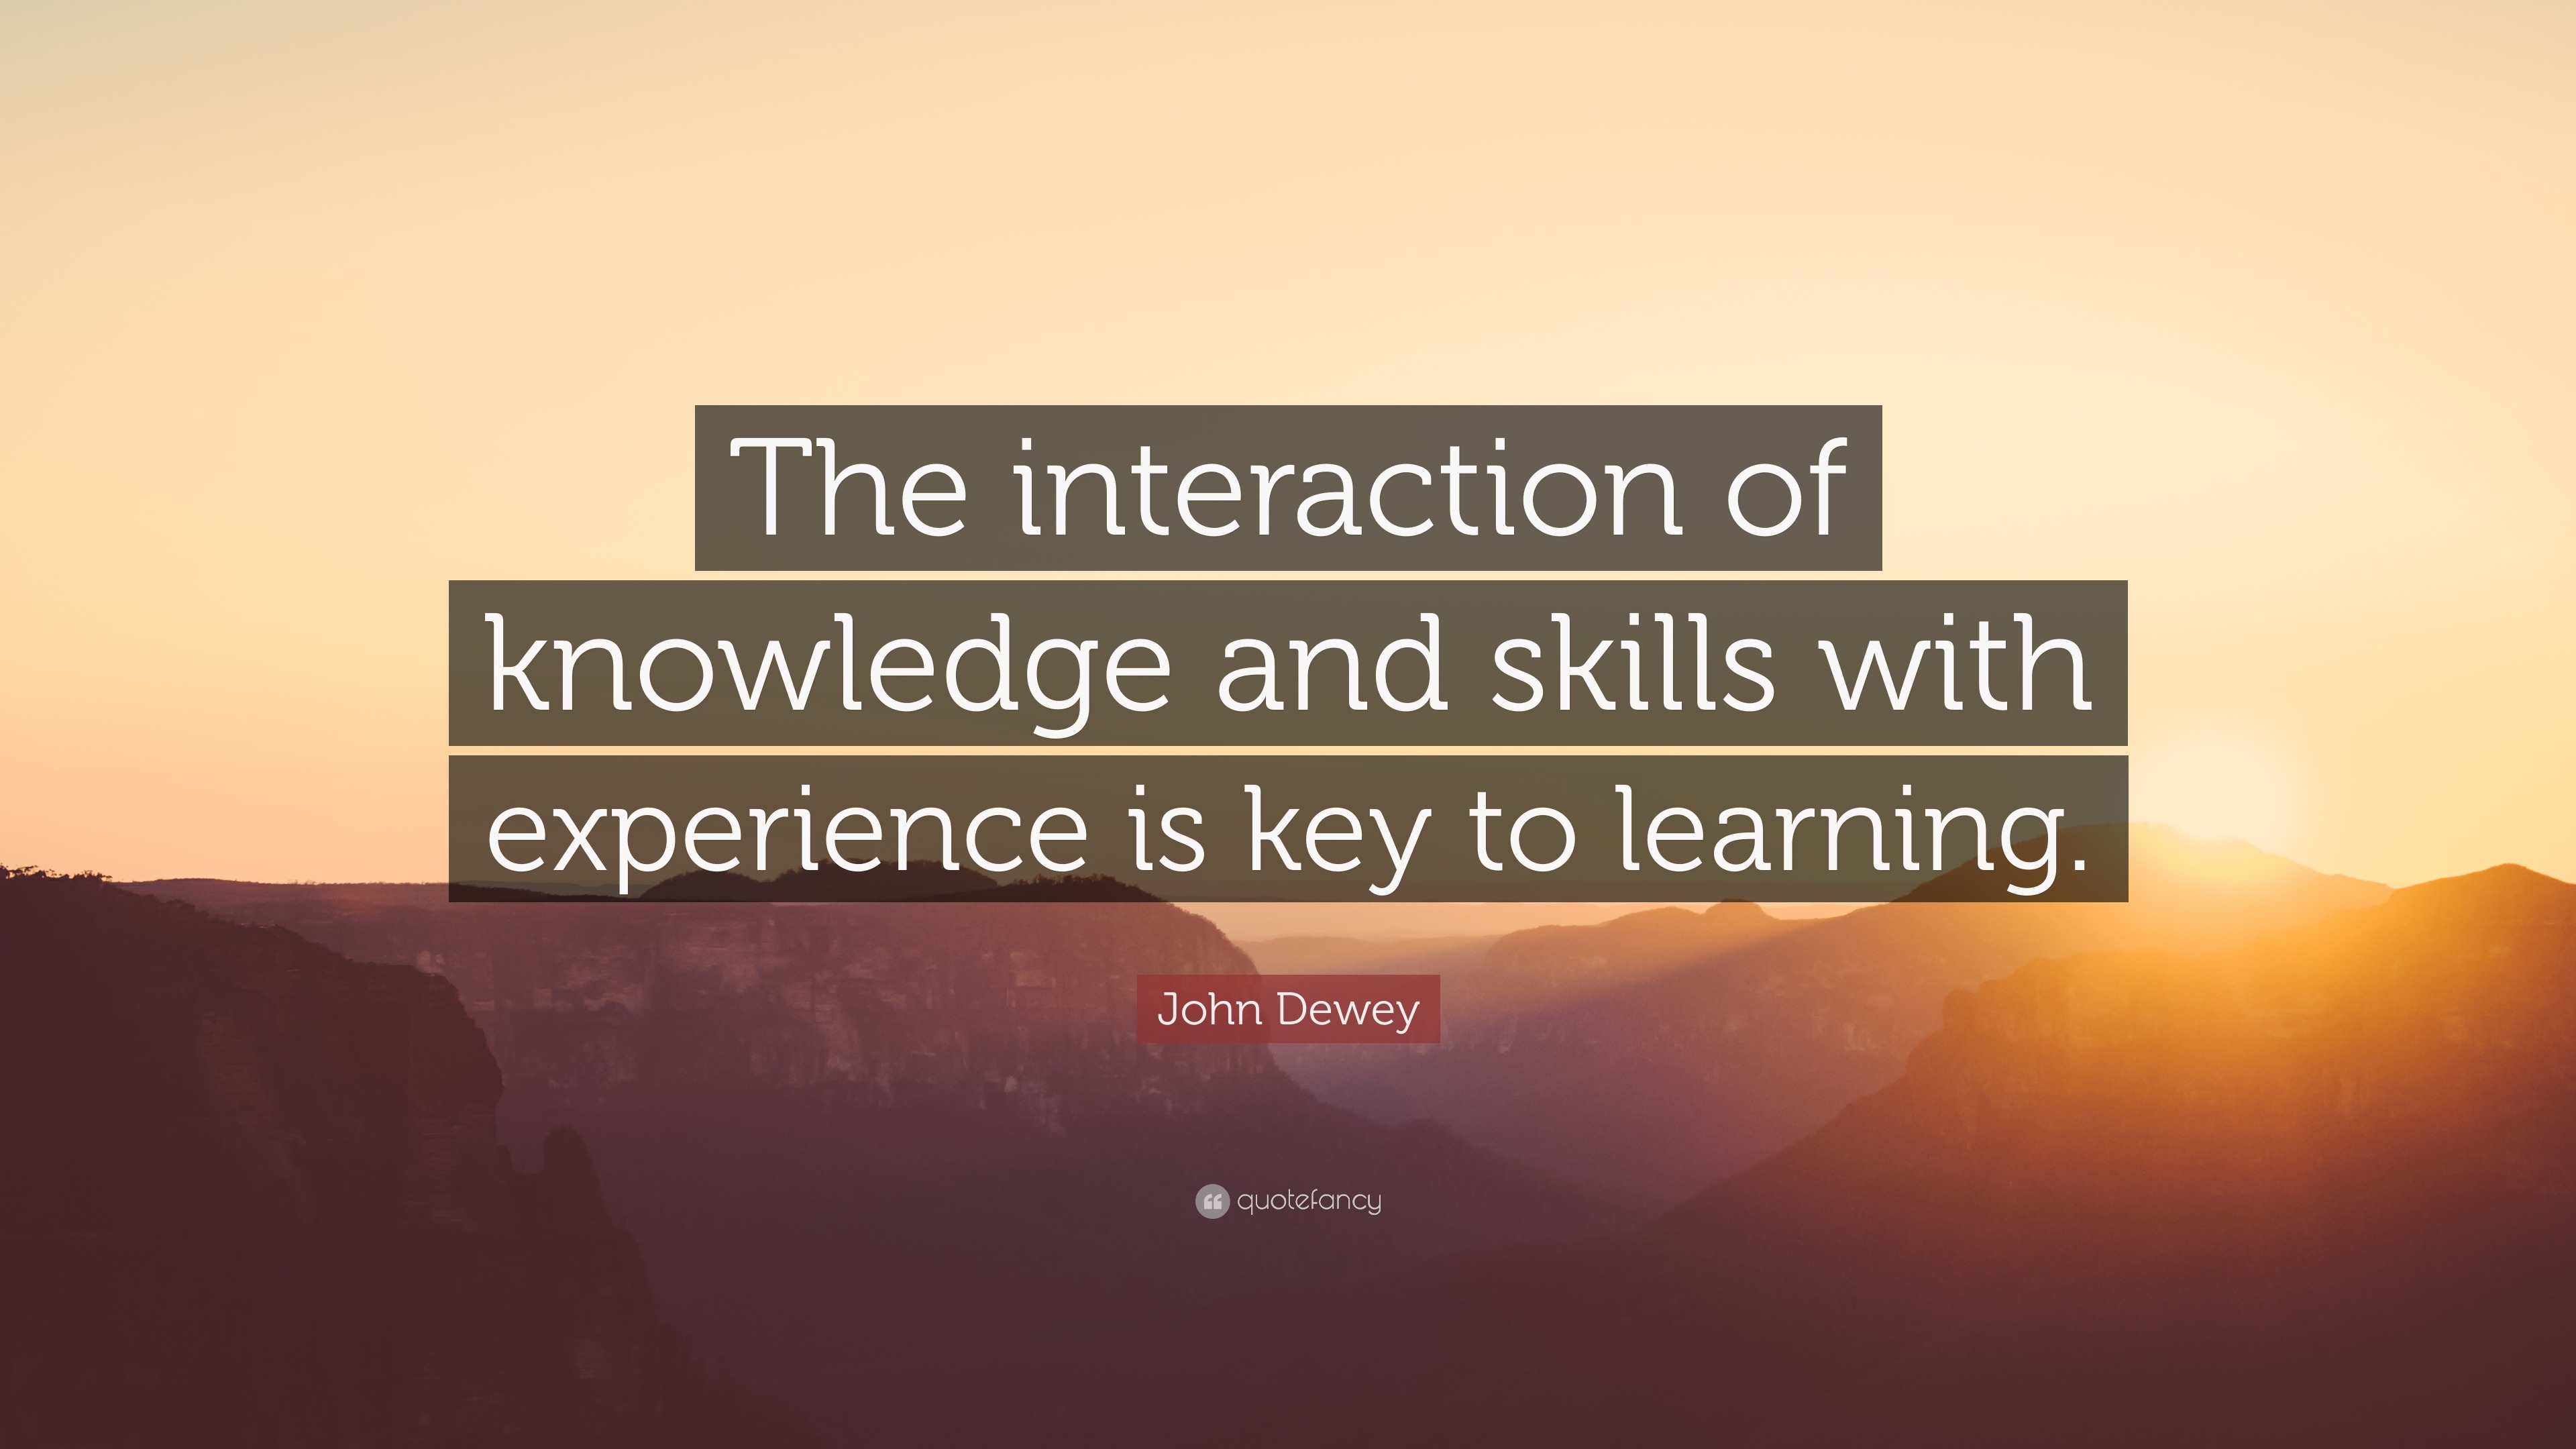 John Dewey Quote: "The interaction of knowledge and skills with ...